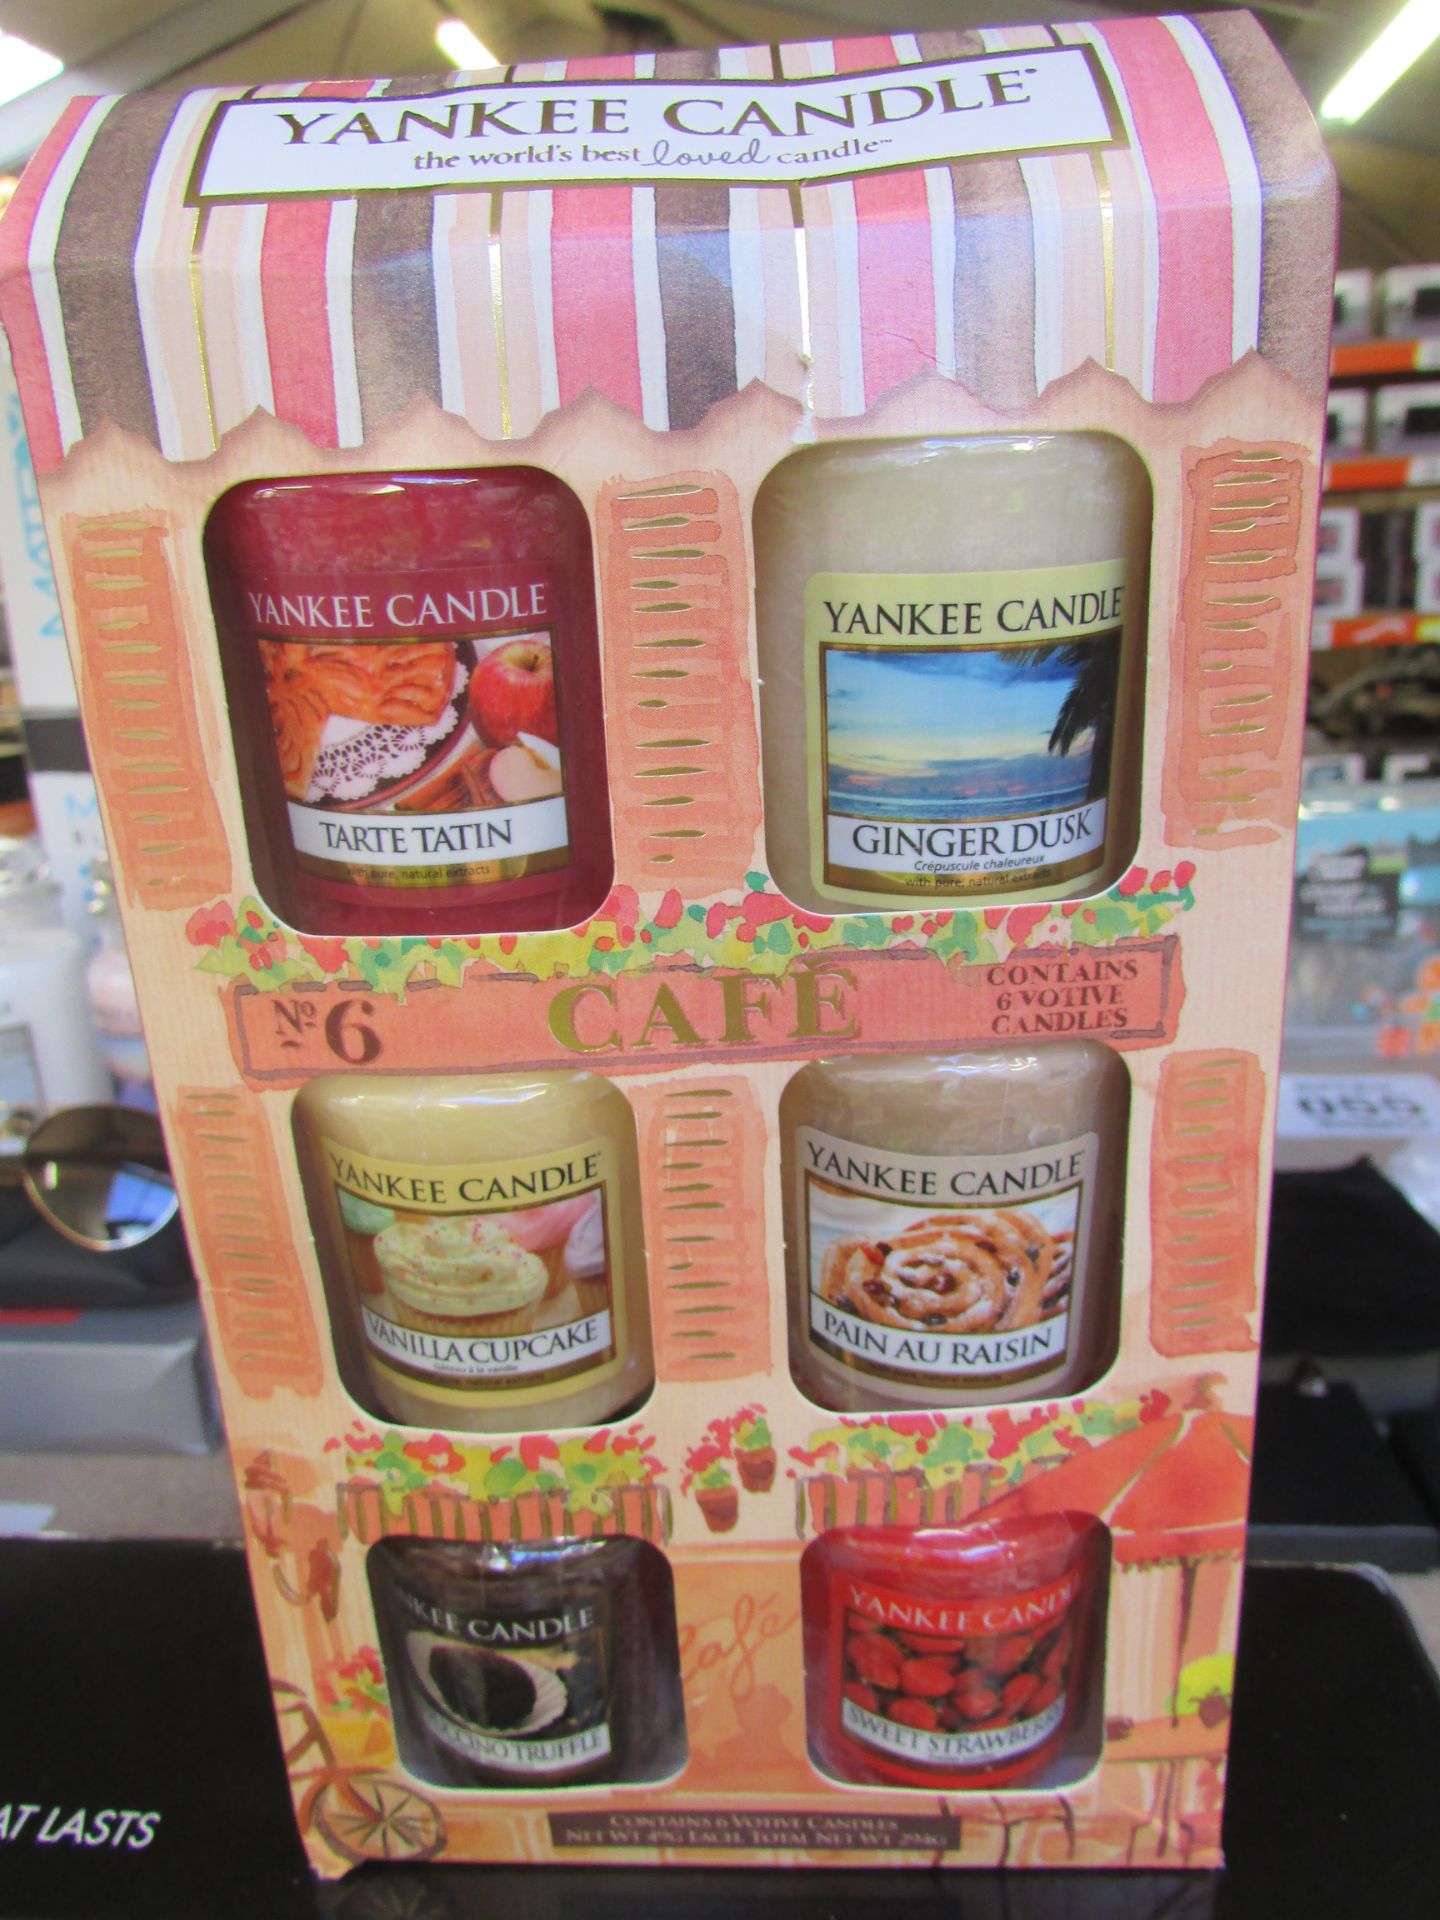 Yankee Candle 6 Votive Cafe Culture House Gift Box Set